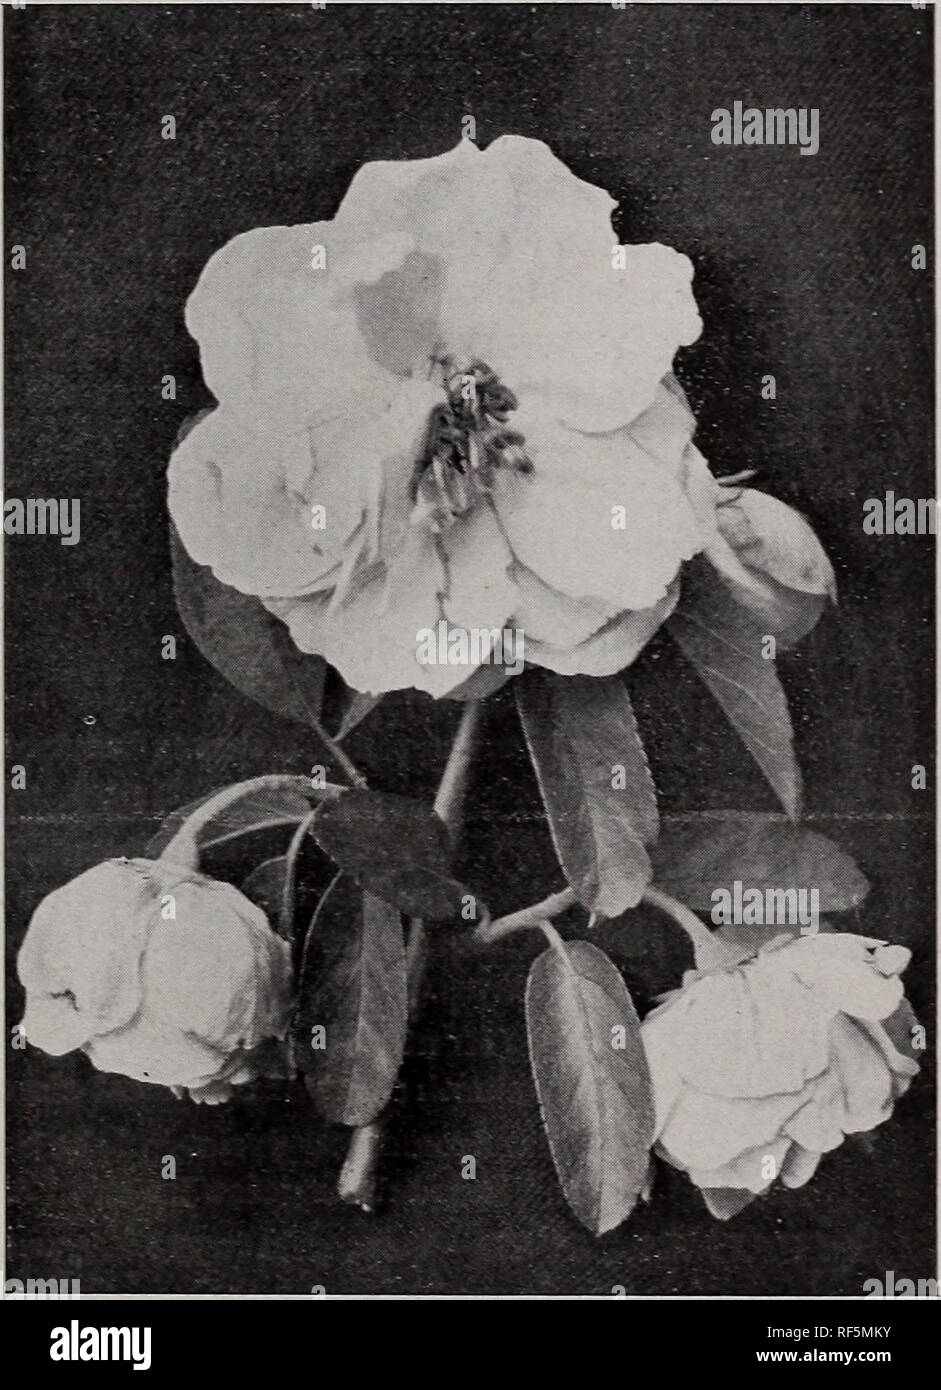 . General catalogue : fruit &amp; ornamental trees, shrubs, roses. Nursery stock New York (State) Geneva Catalogs; Fruit trees Seedlings Catalogs; Fruit Catalogs; Plants, Ornamental Catalogs; Trees Seedlings Catalogs; Shrubs Catalogs; Flowers Catalogs. DECIDUOUS TREES 45 habit of the birches, and having purple foliage combining favorably Avith the other birches. PYRAMIDAL (Fastigiata ;—In growth fastigiate, like the poplar, where a small column-shaped tree is needed, it is of value ; a vigorous and excellent grower, bark white. i YOUNG'S WEEPING BIRCH or ELEGANTISSIMA PENDULA—A variety of Alba Stock Photo